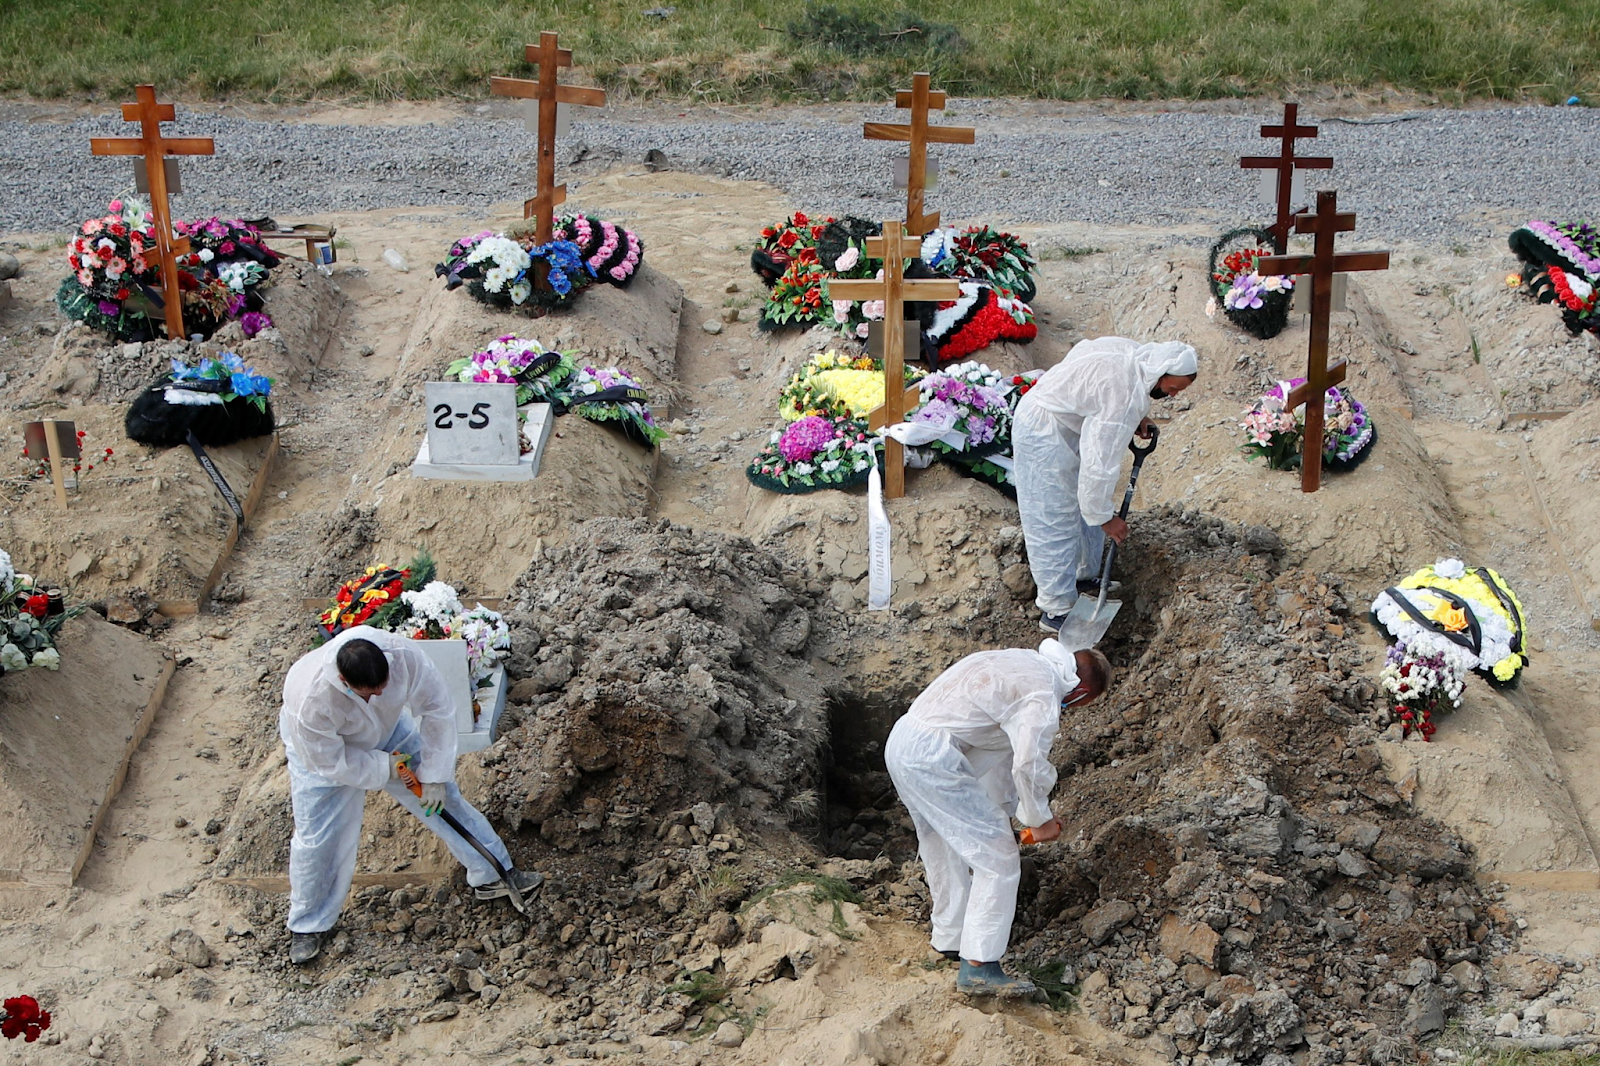 Workers in hazmat suits burying bodies in graves due to the pandemic. 